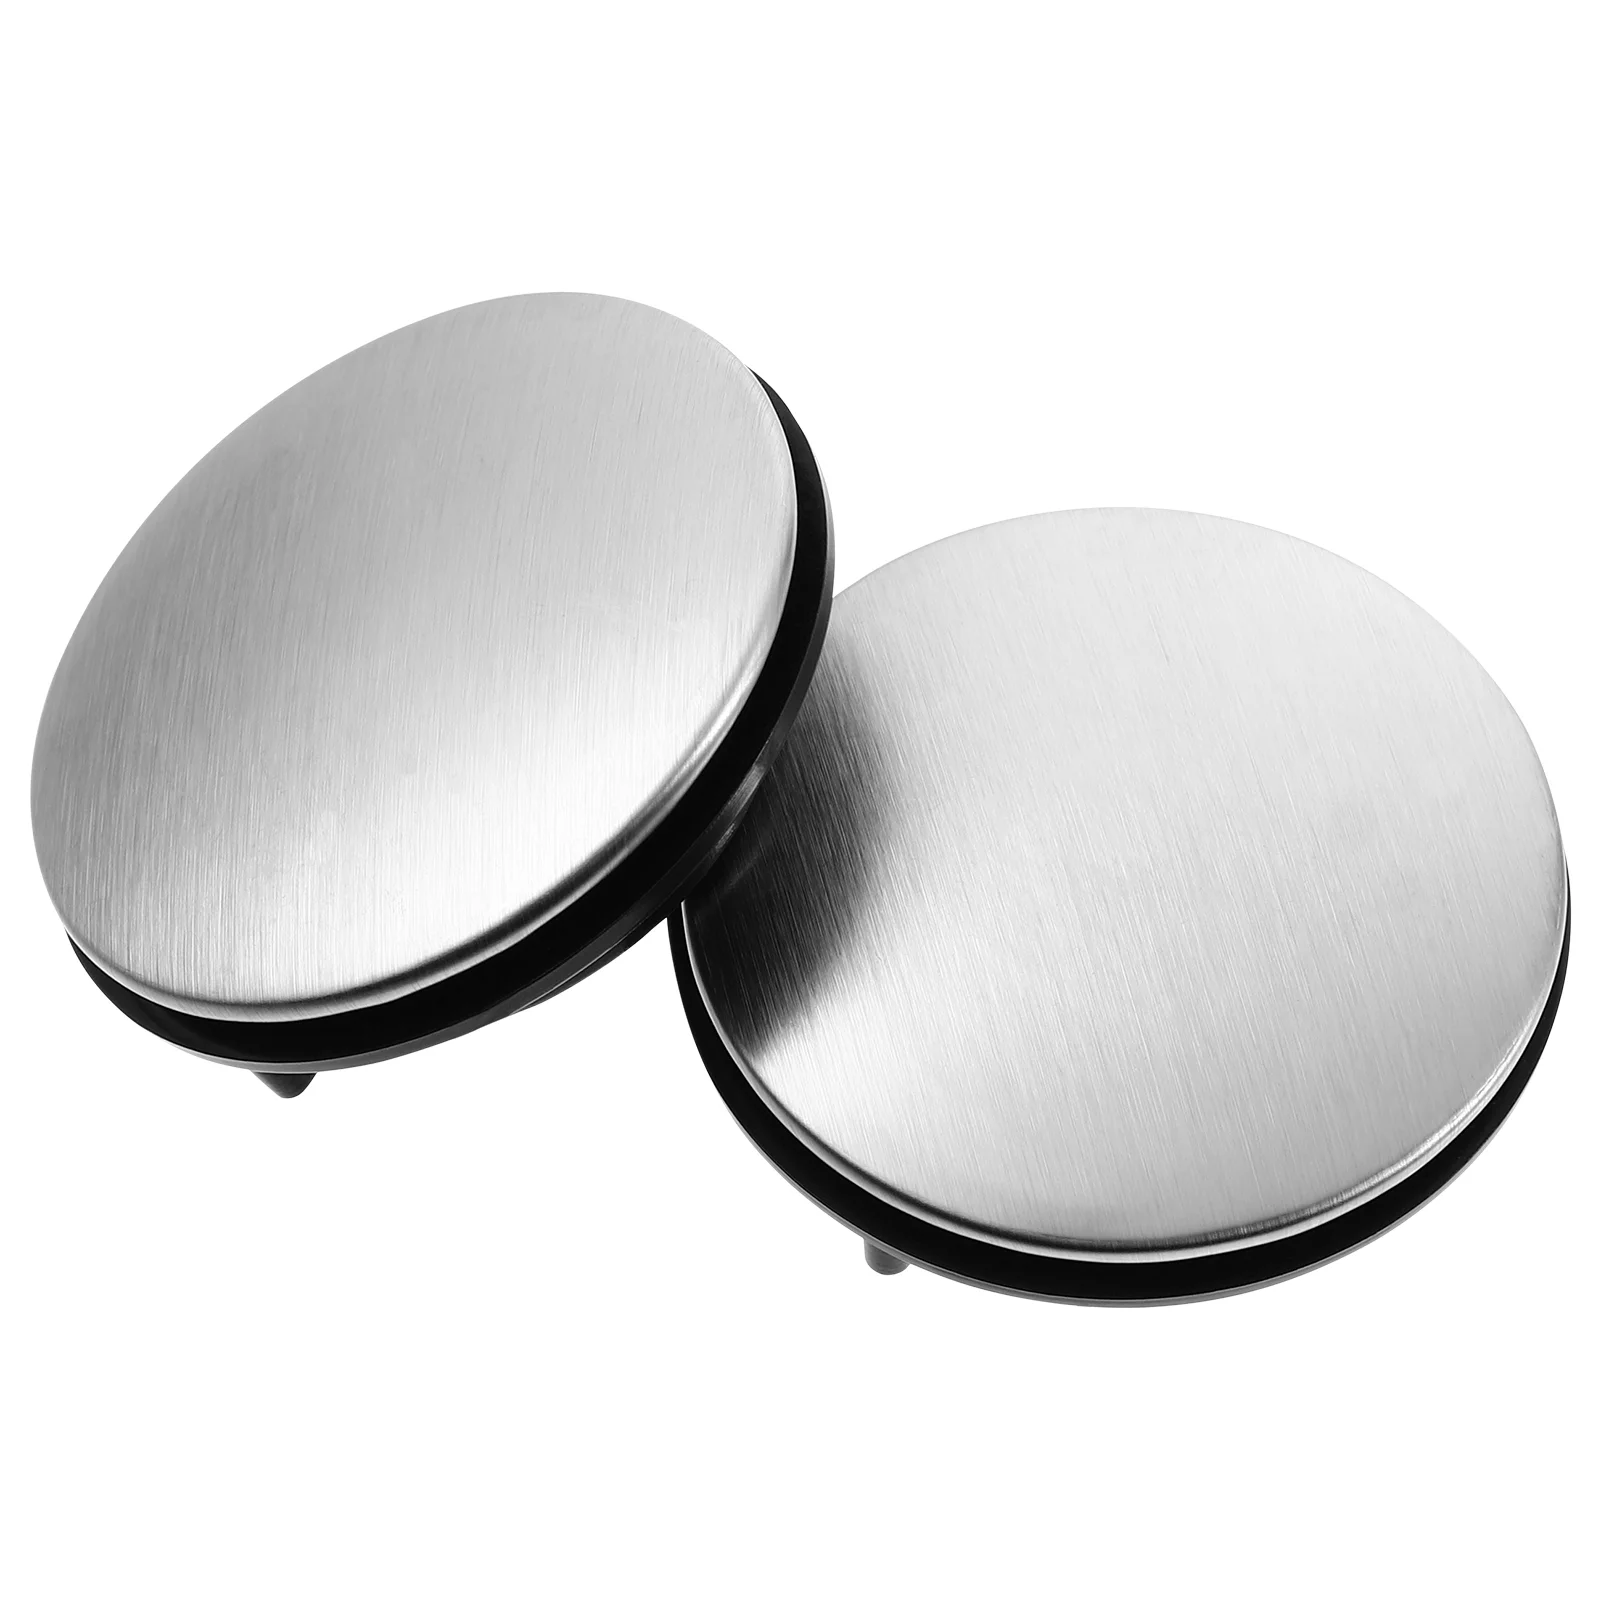 

Toyvian 2pcs Sink Tap Hole Cover Kitchen Stainless Steel Faucet Hole Cover Compatible for Diameter 31-40mm